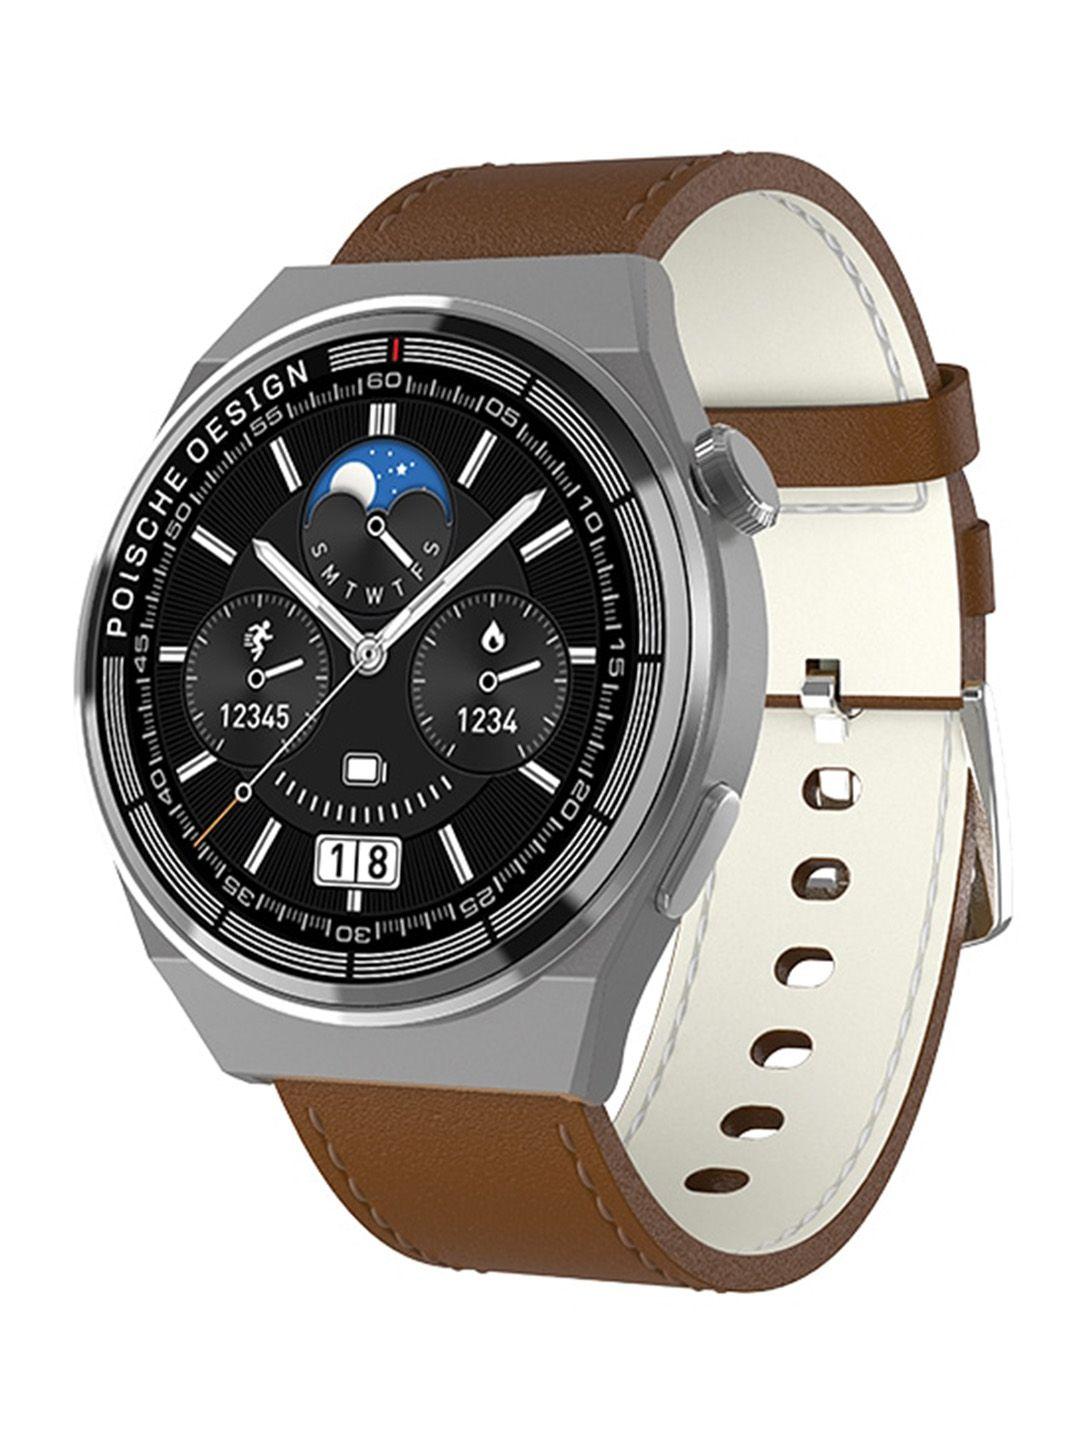 french connection beam premium smart watches